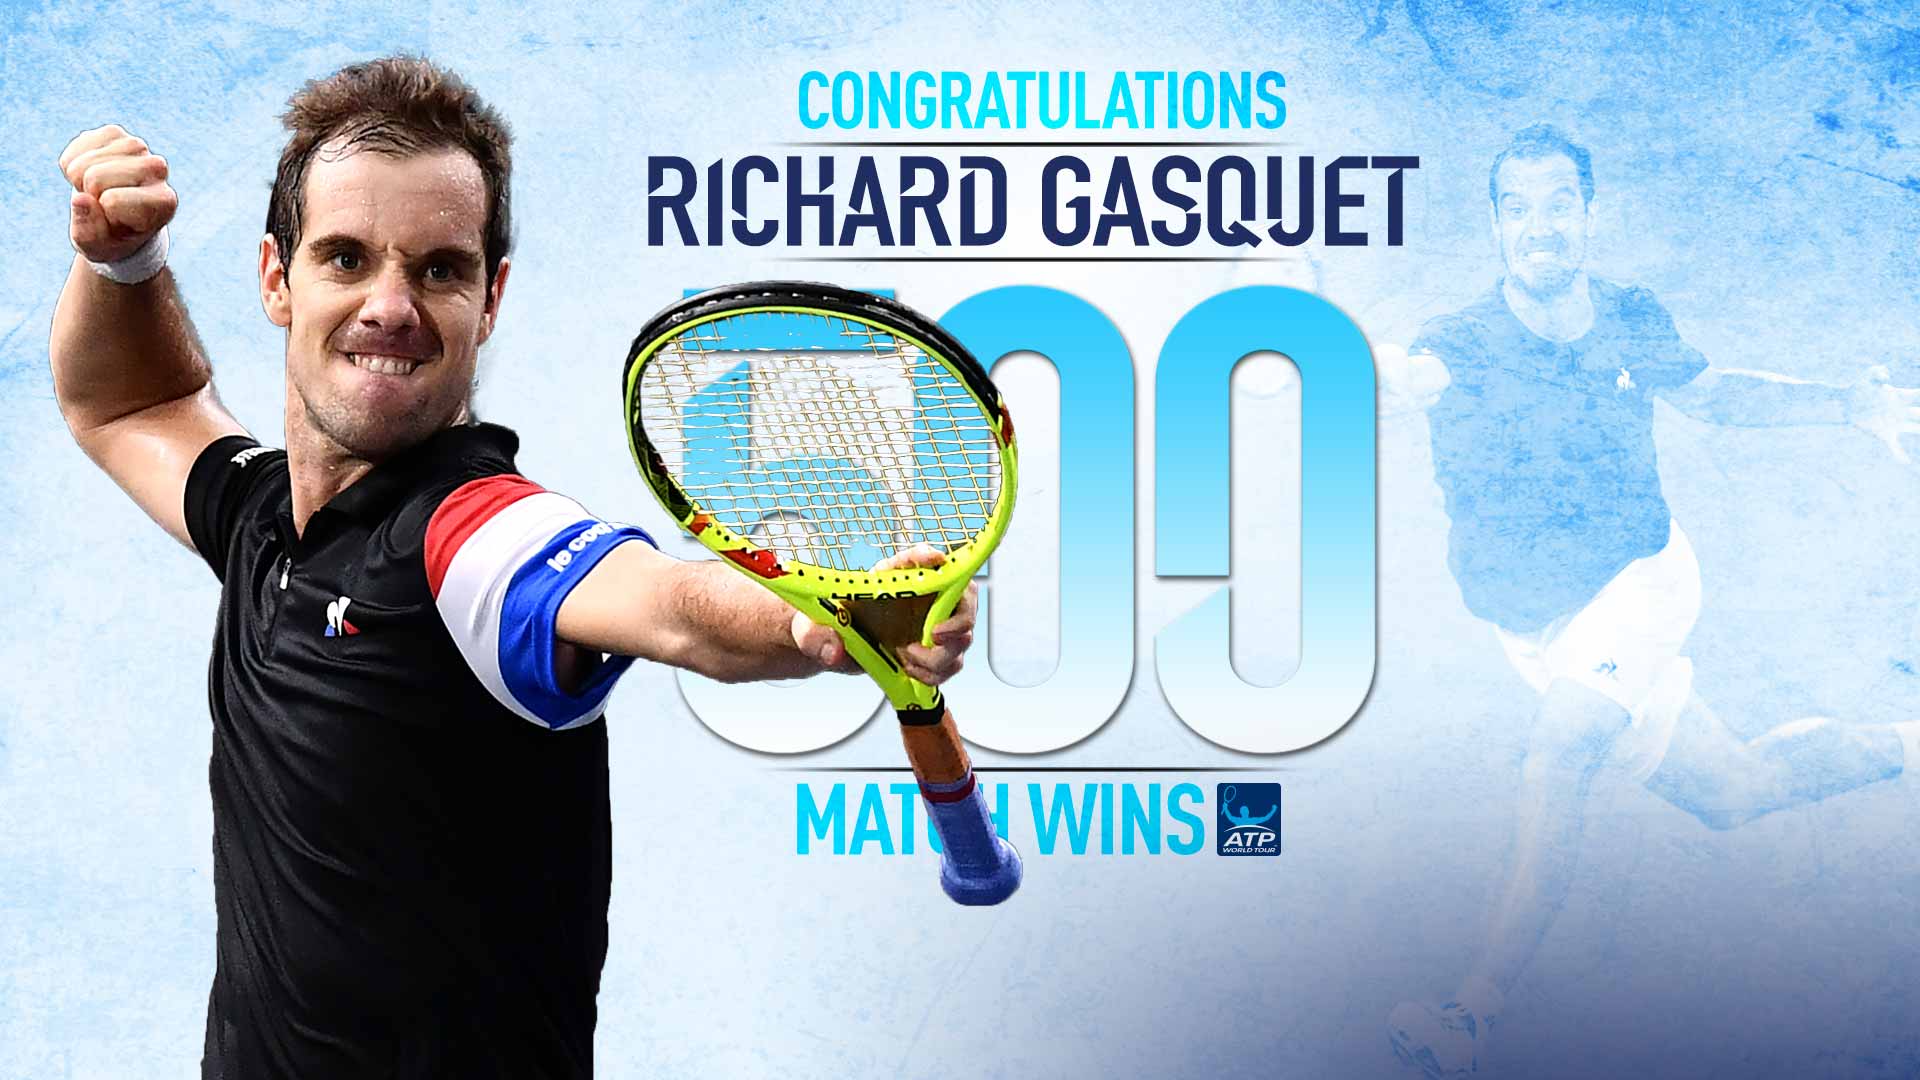 Richard Gasquet becomes the first Frenchman in the Open Era to win 500 matches.